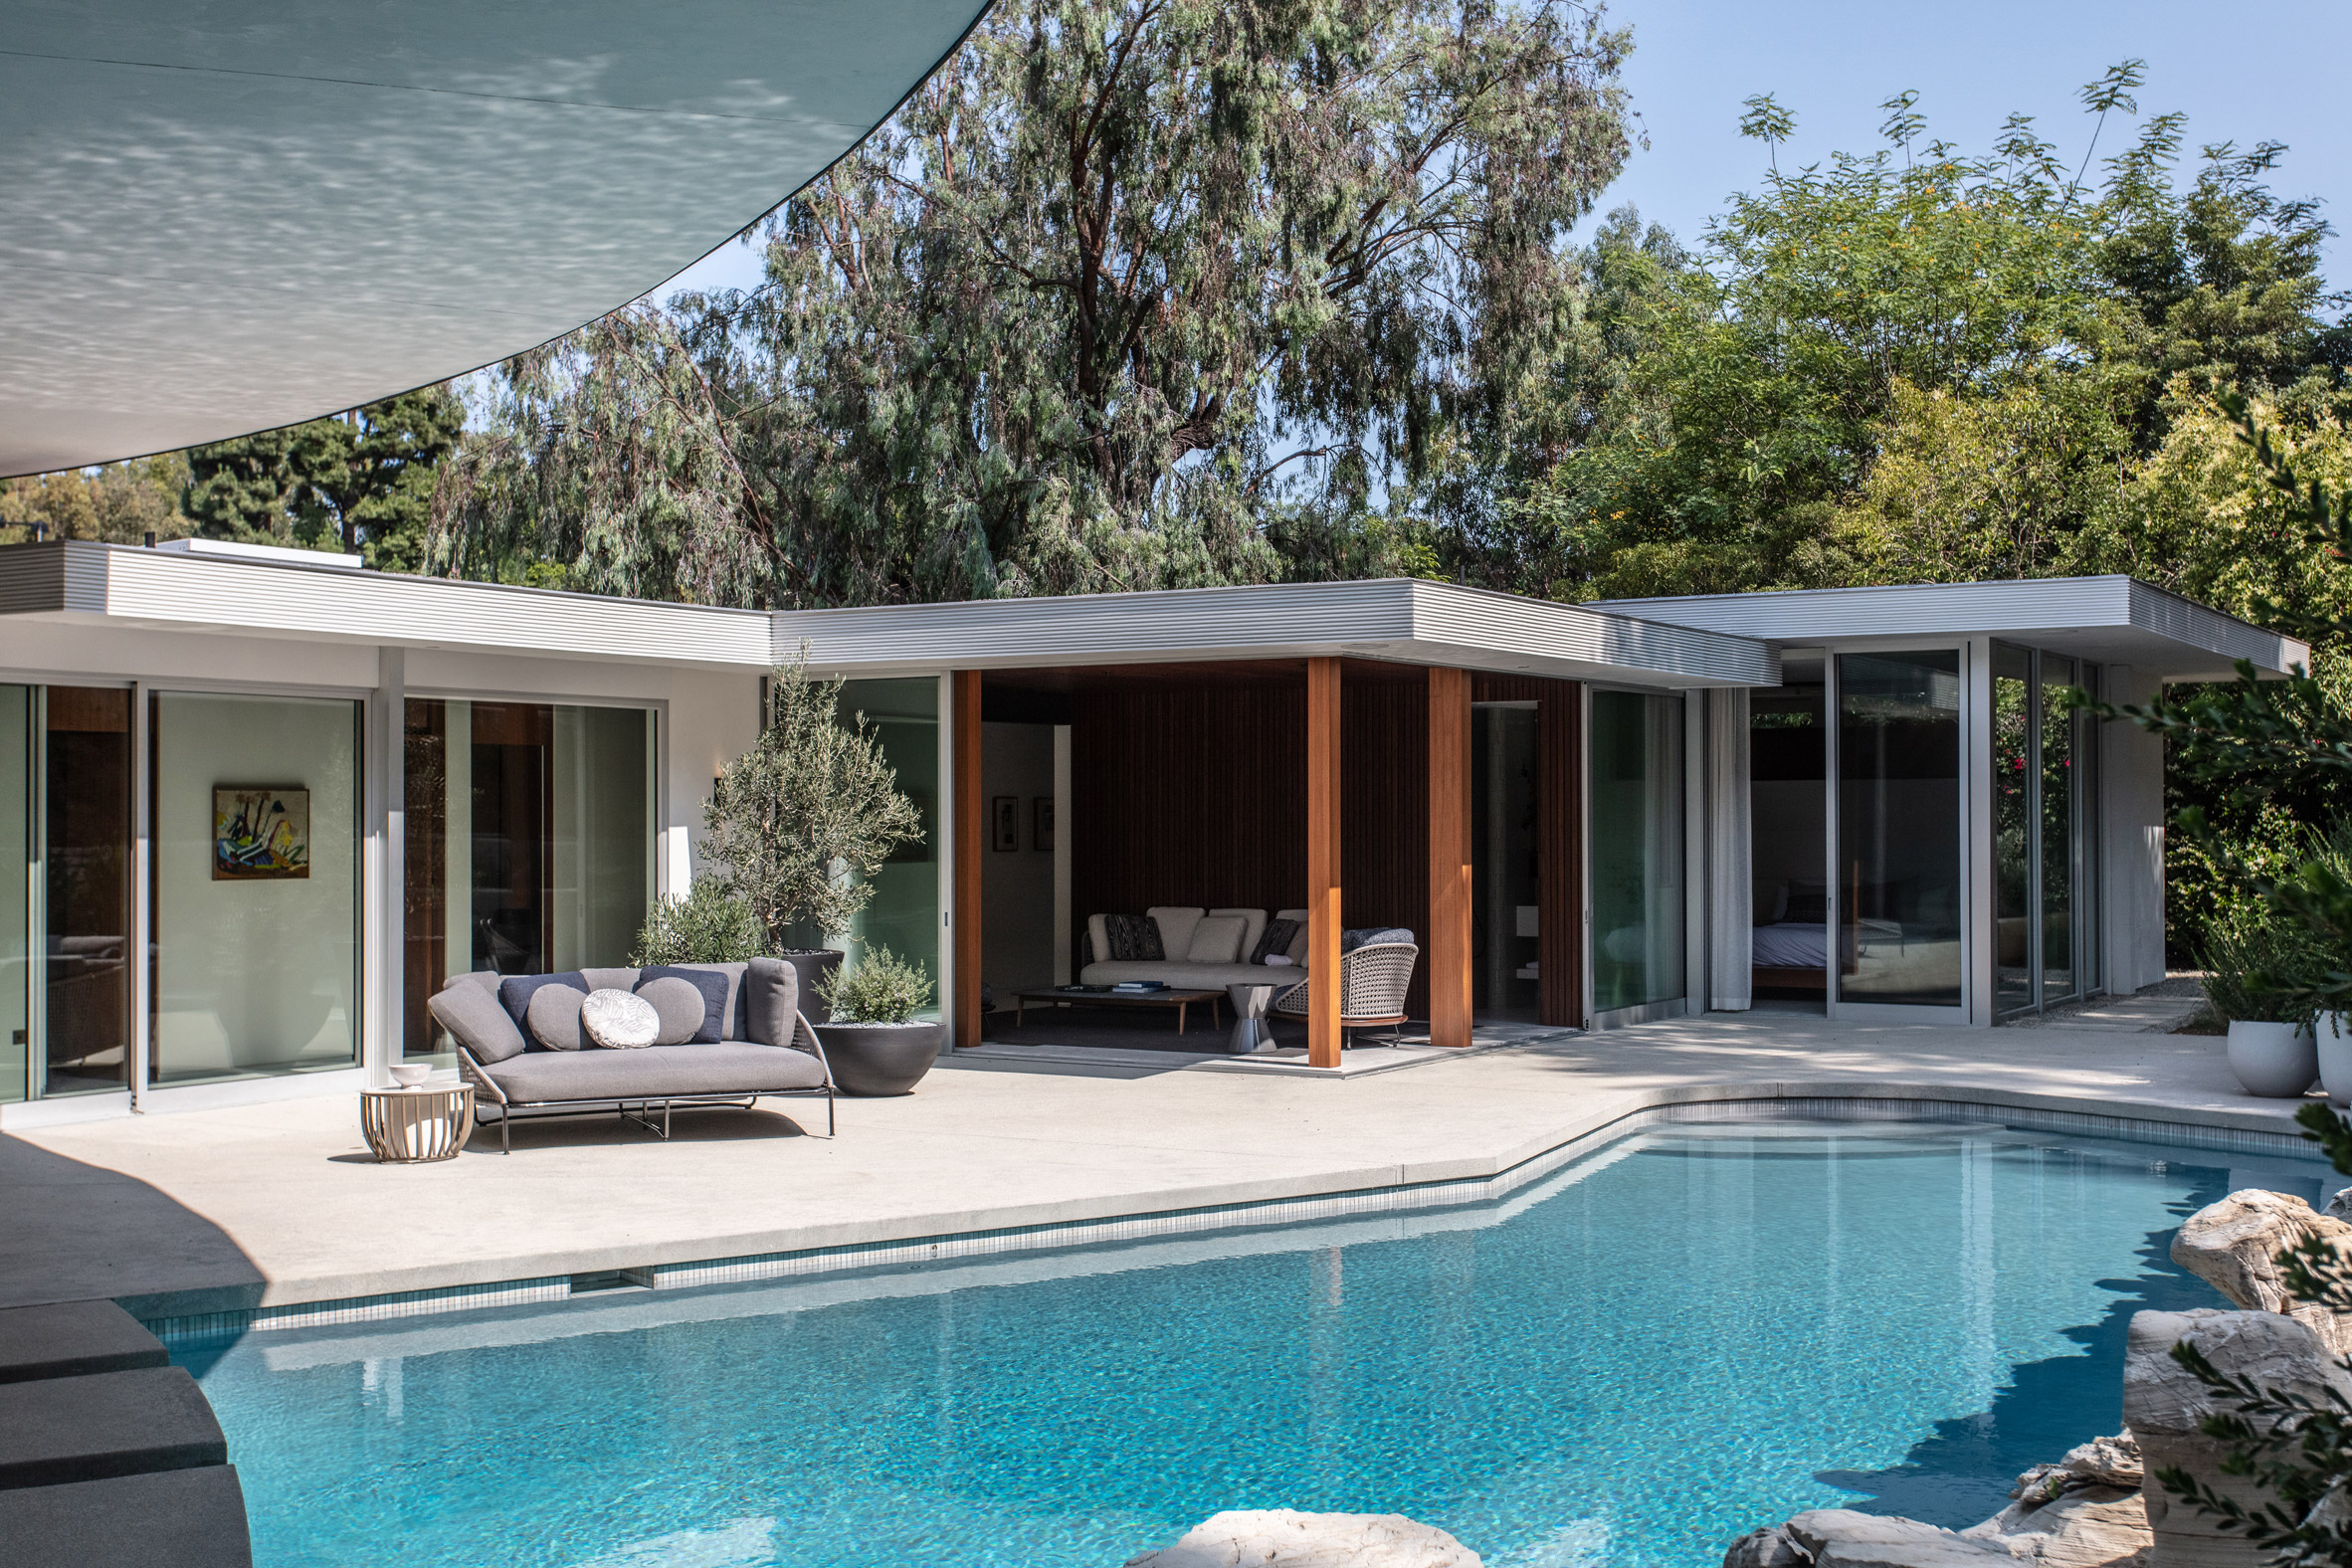 The Cove Way House in Los Angeles